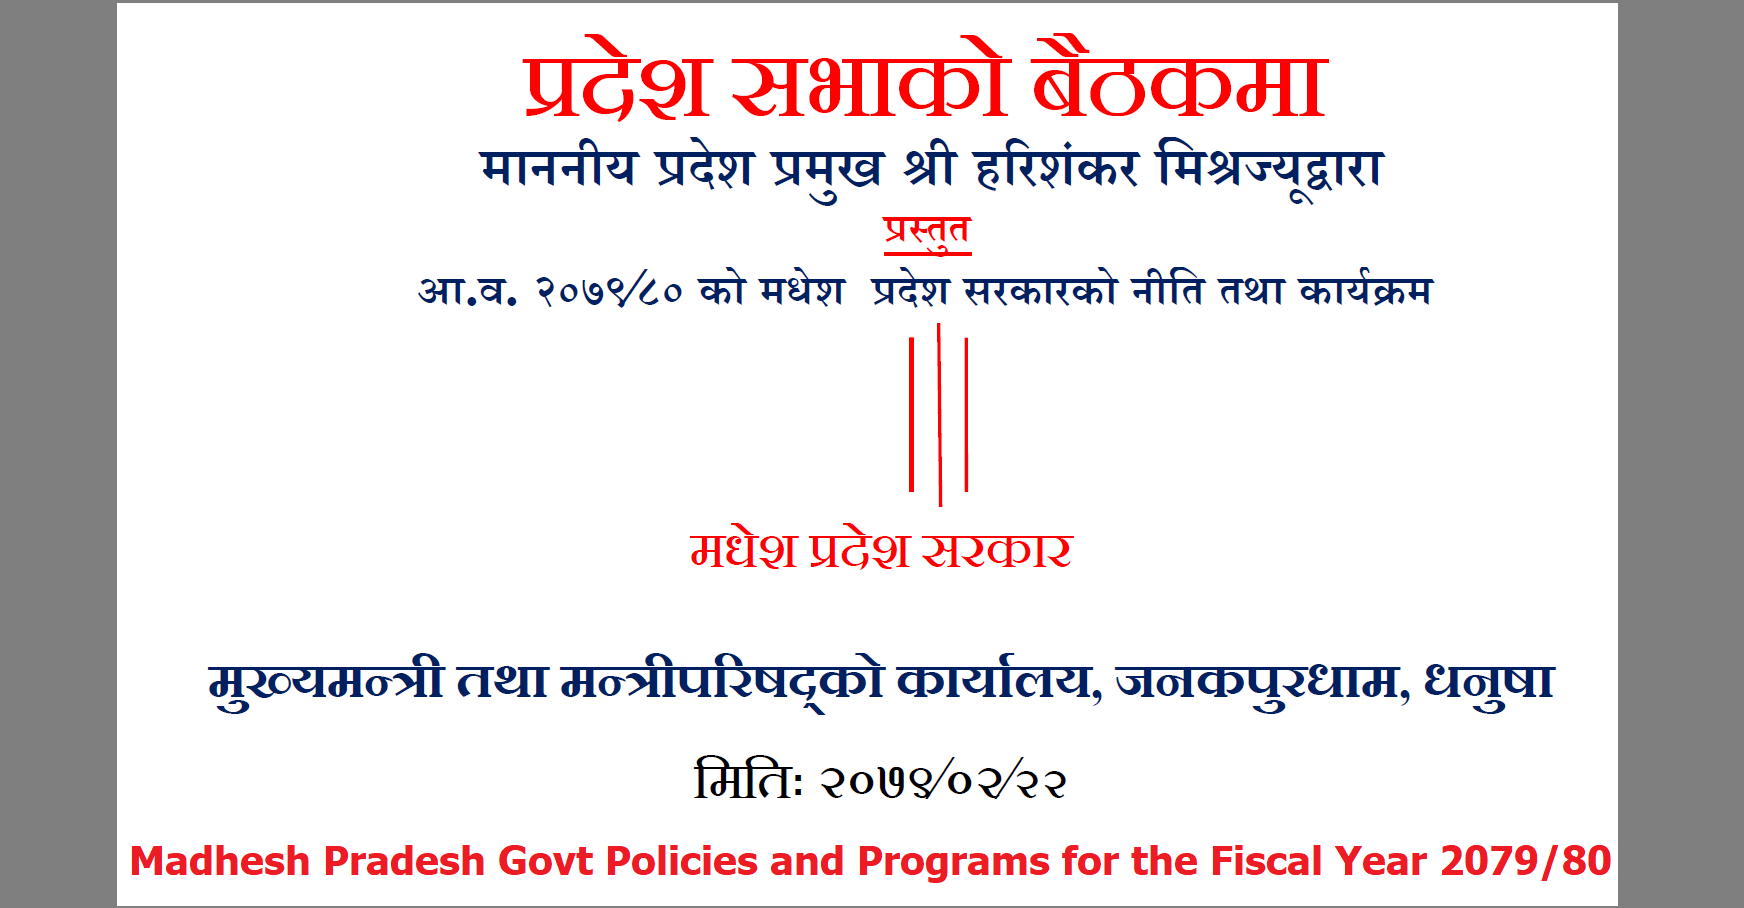 Madhesh Pradesh Govt Policies and Programs for the Fiscal Year 2079-80